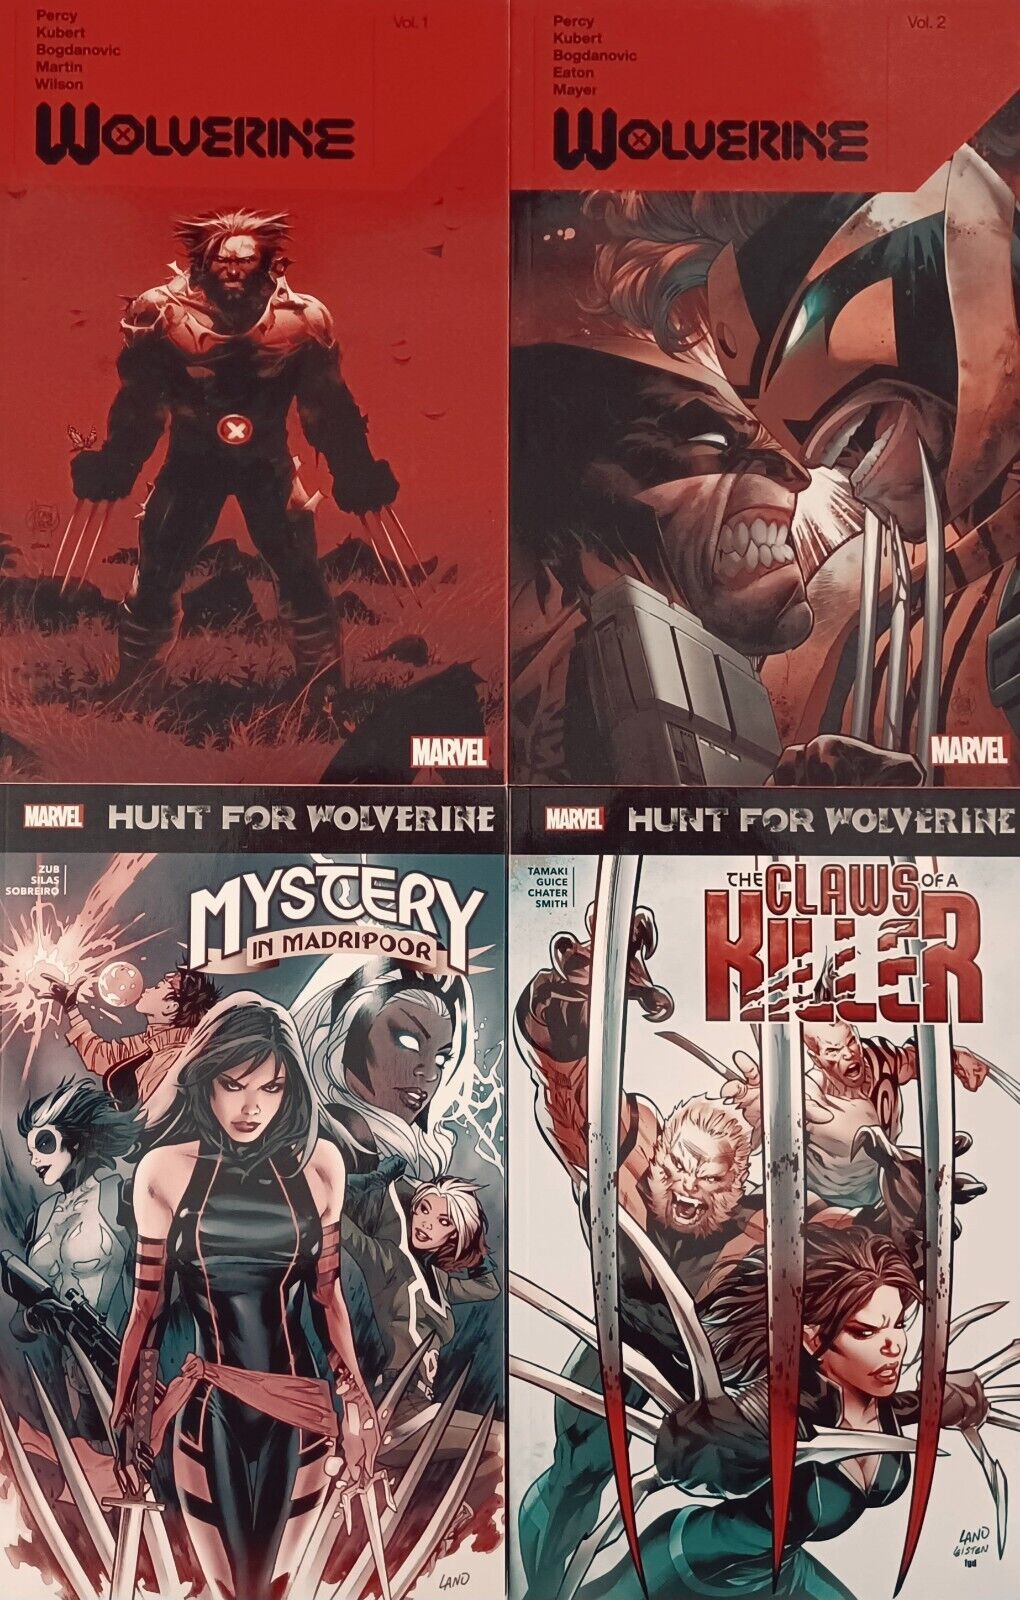 WOLVERINE: v1-2, Hunt For Wolverine: Mystery in Madripoor, the Claws of a Killer